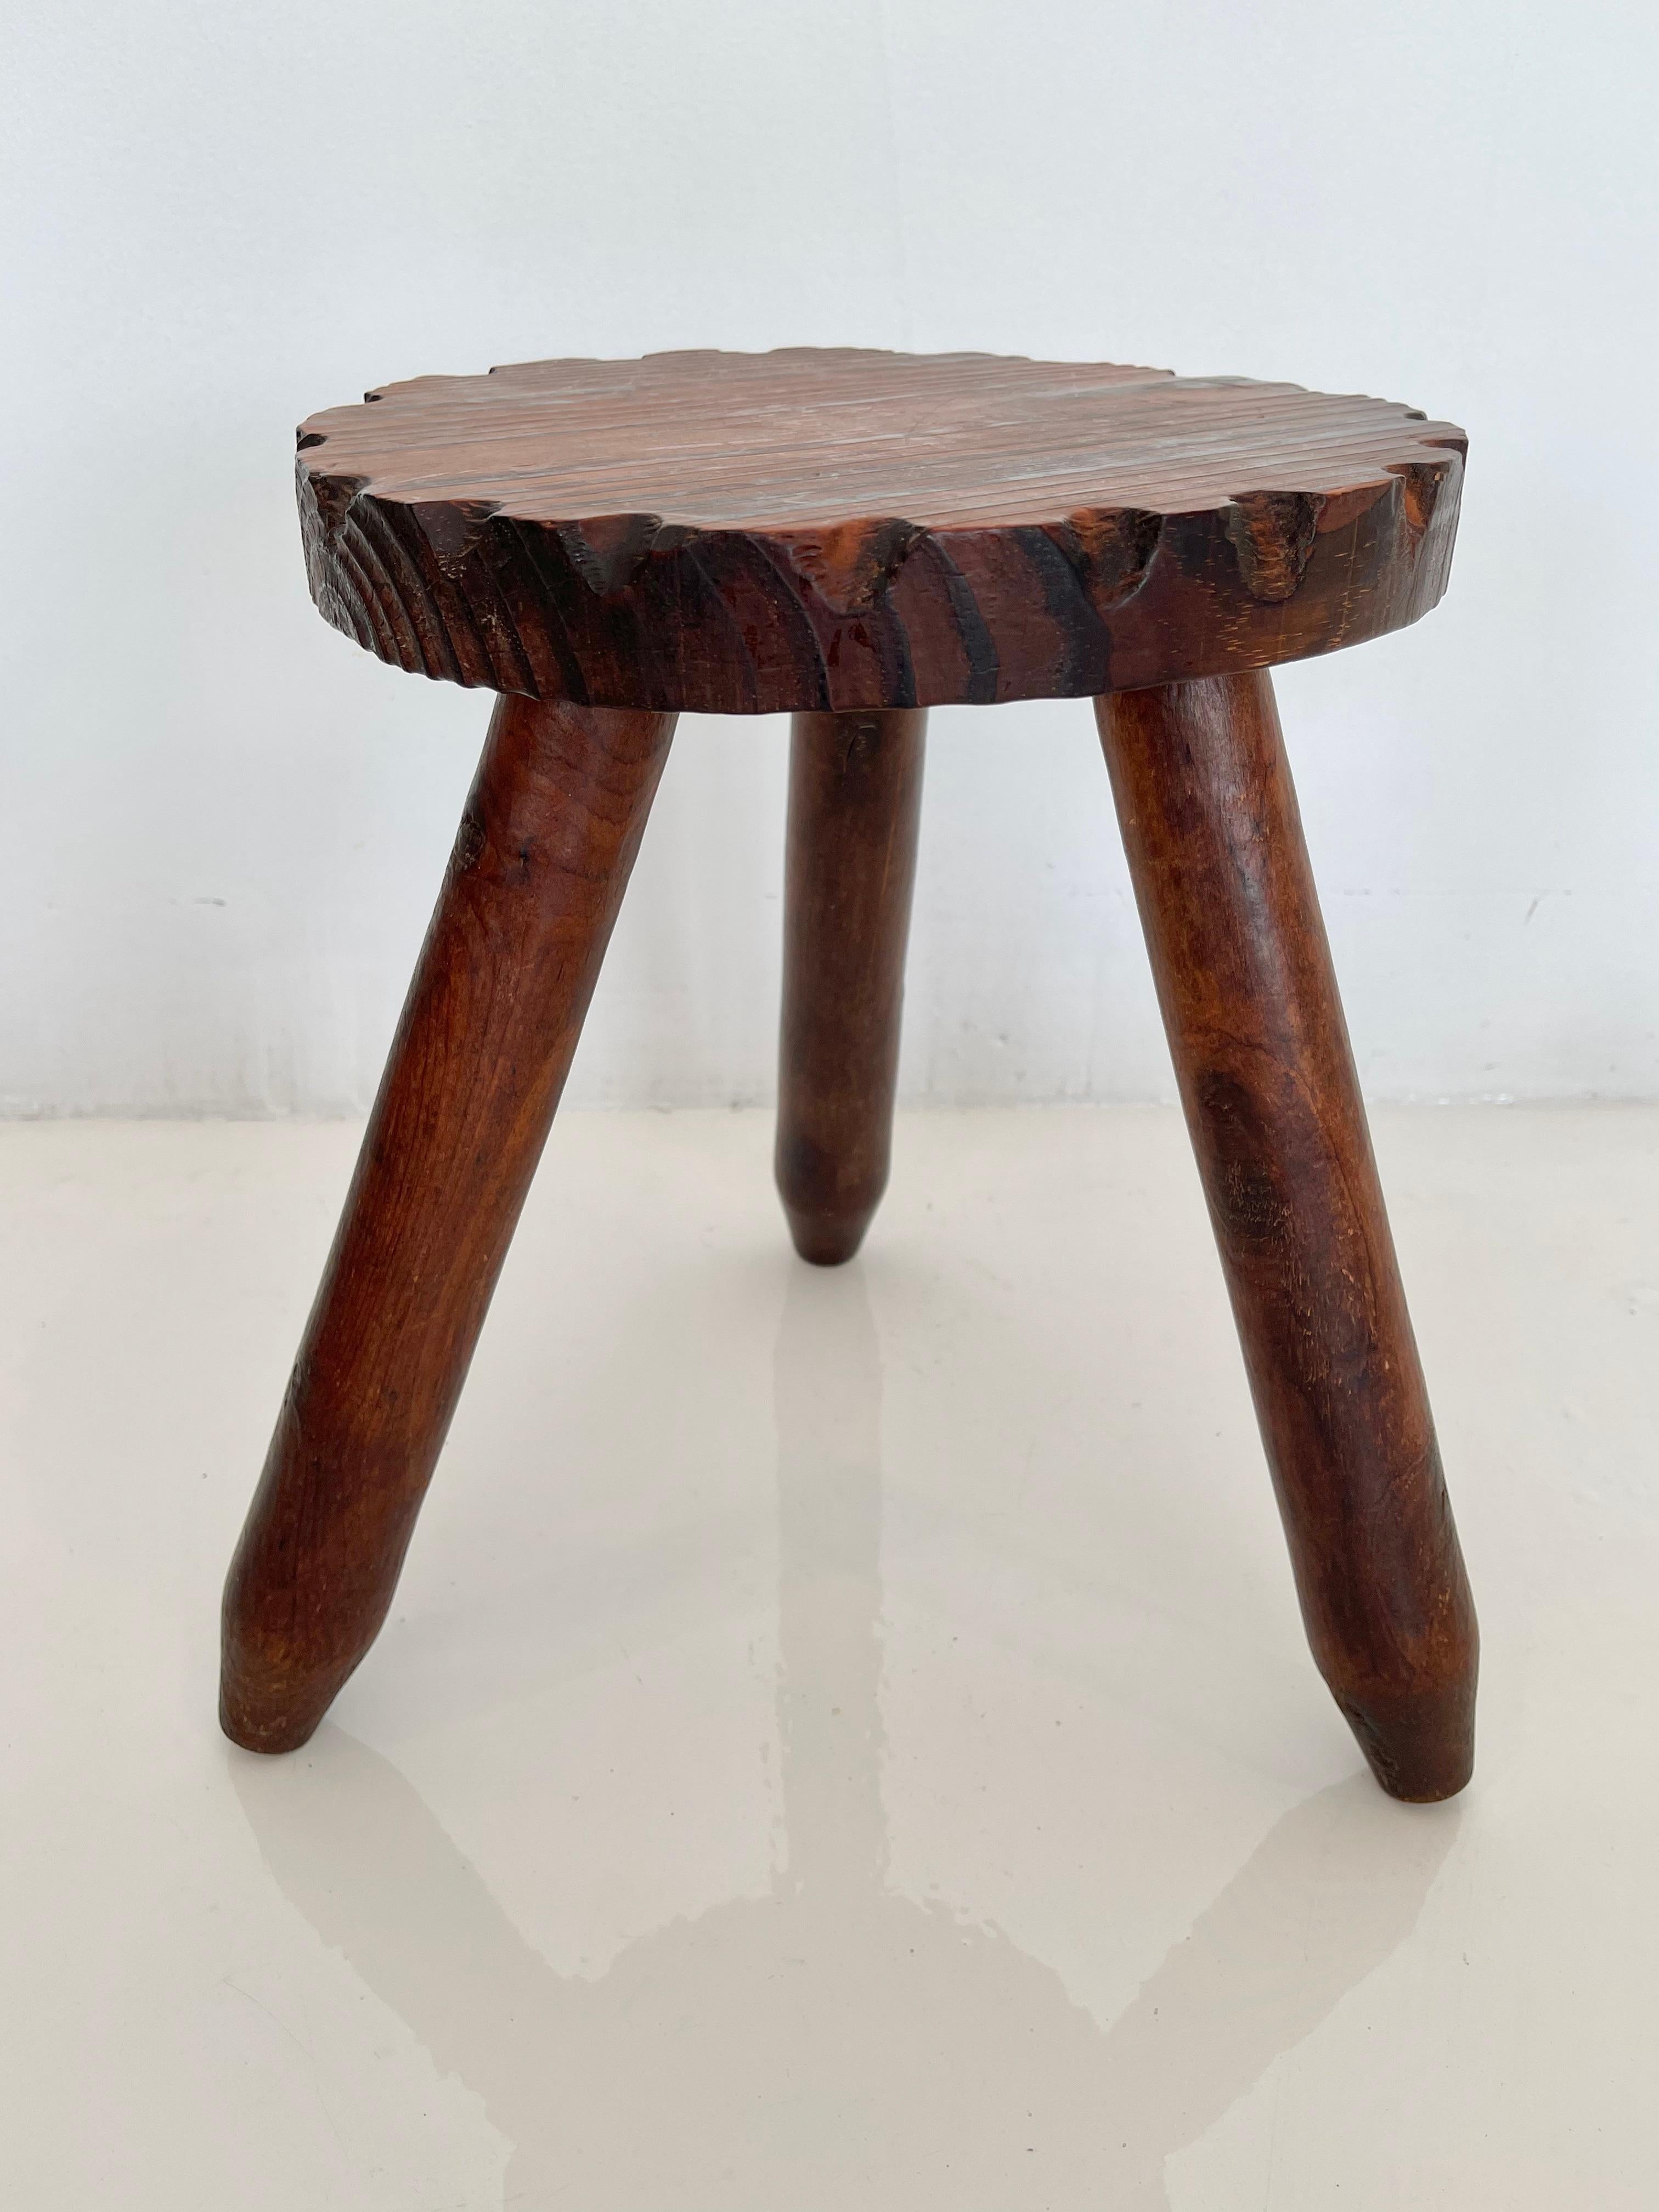 Unusual wood tripod milking stool made in France, circa 1950s. Great patina to wood with scalloped notches around seat and three thick legs. No nails or hardware. Petite stool with great presence. Good vintage condition.